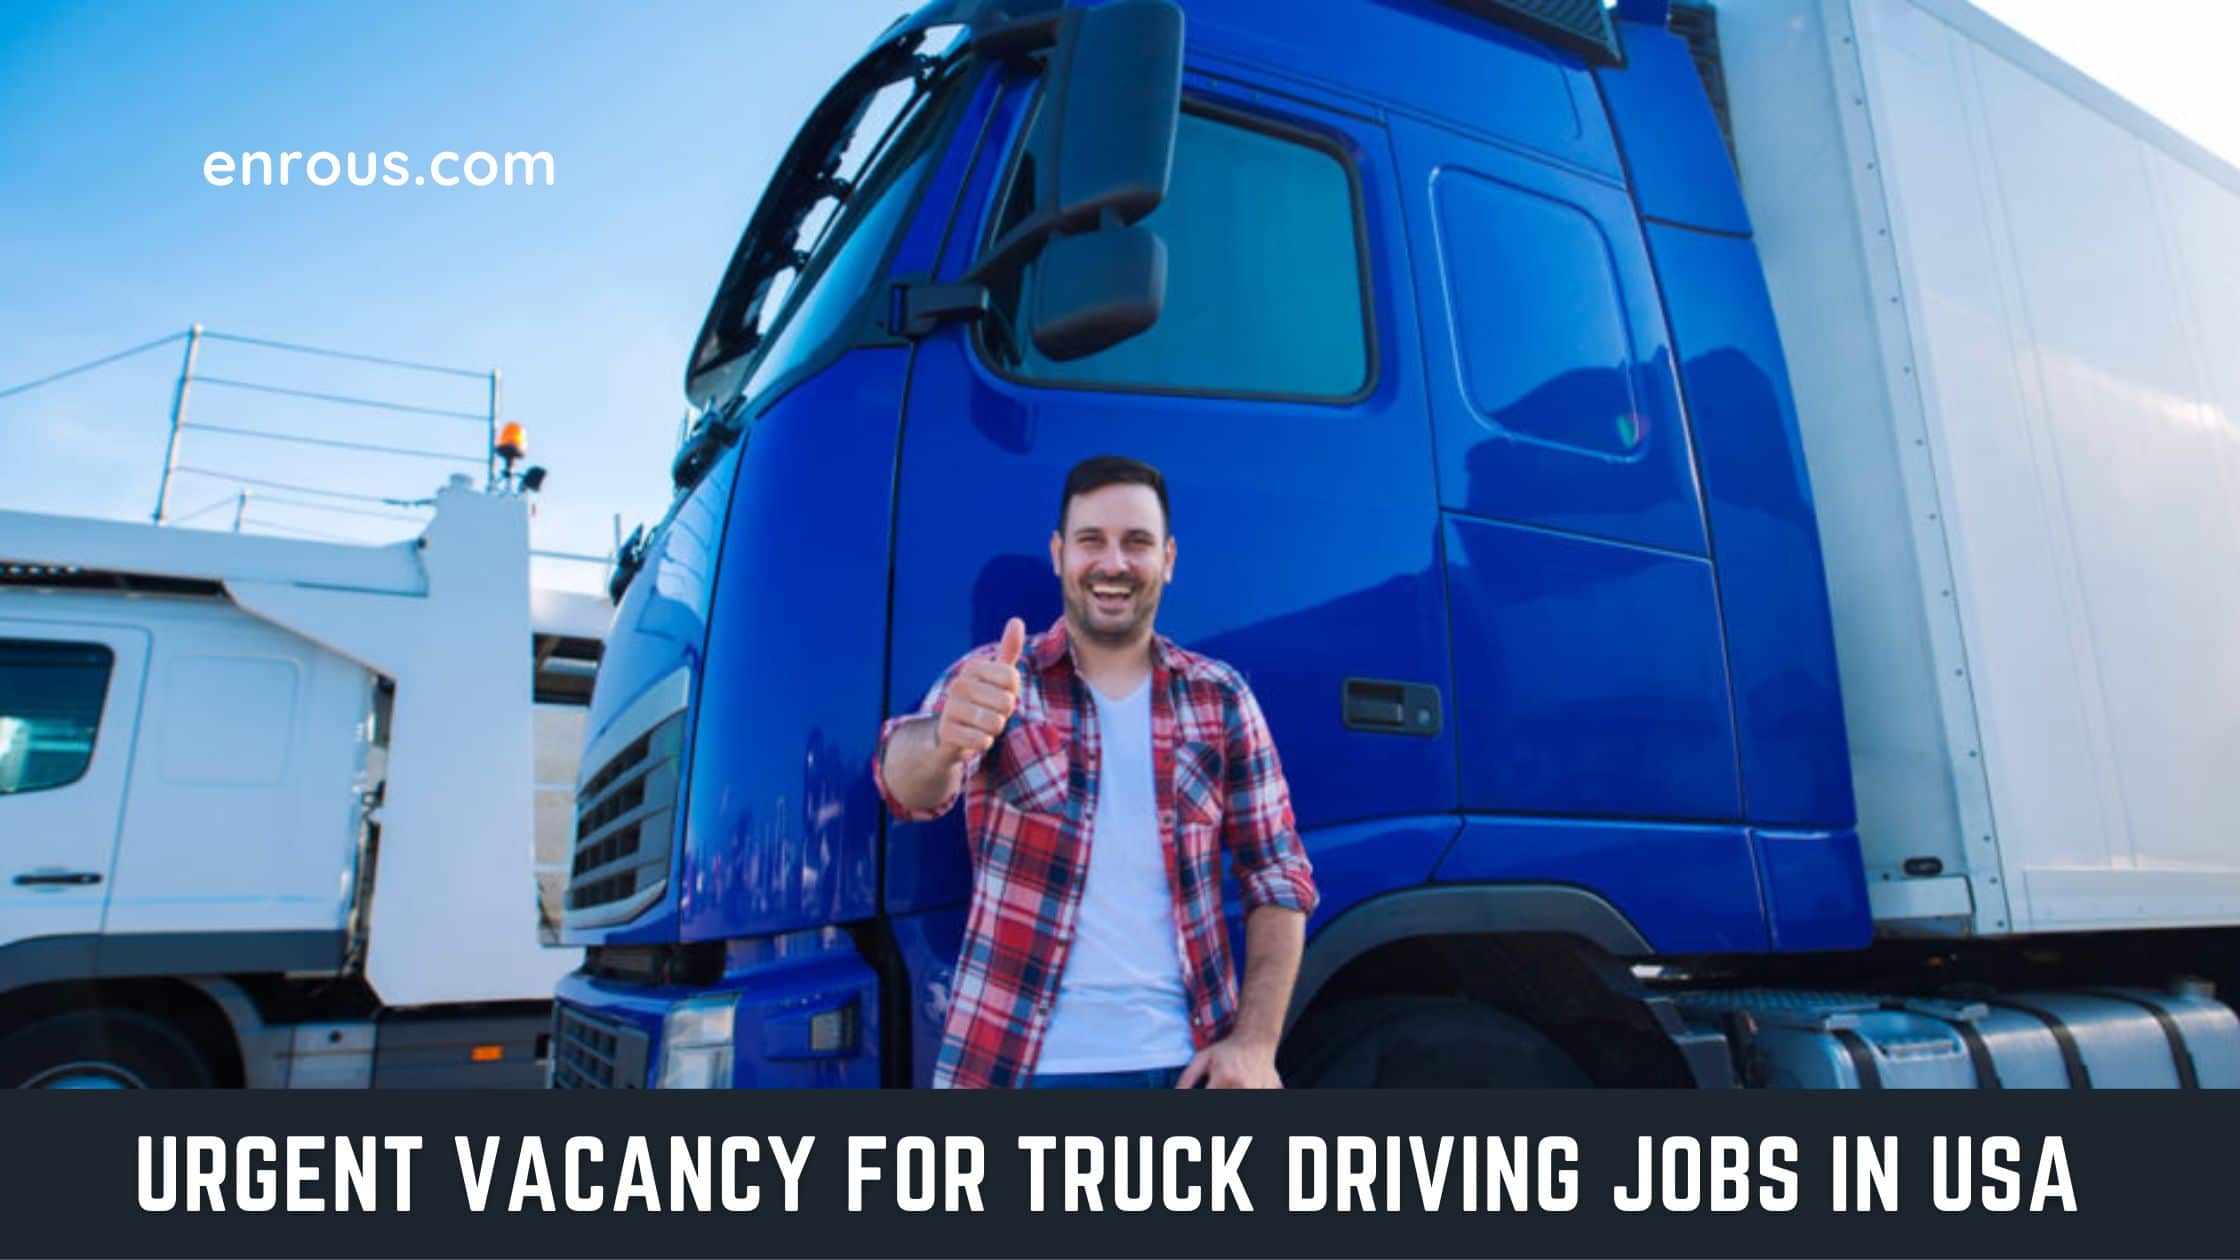 Urgent Vacancy For Truck Driving Jobs in USA